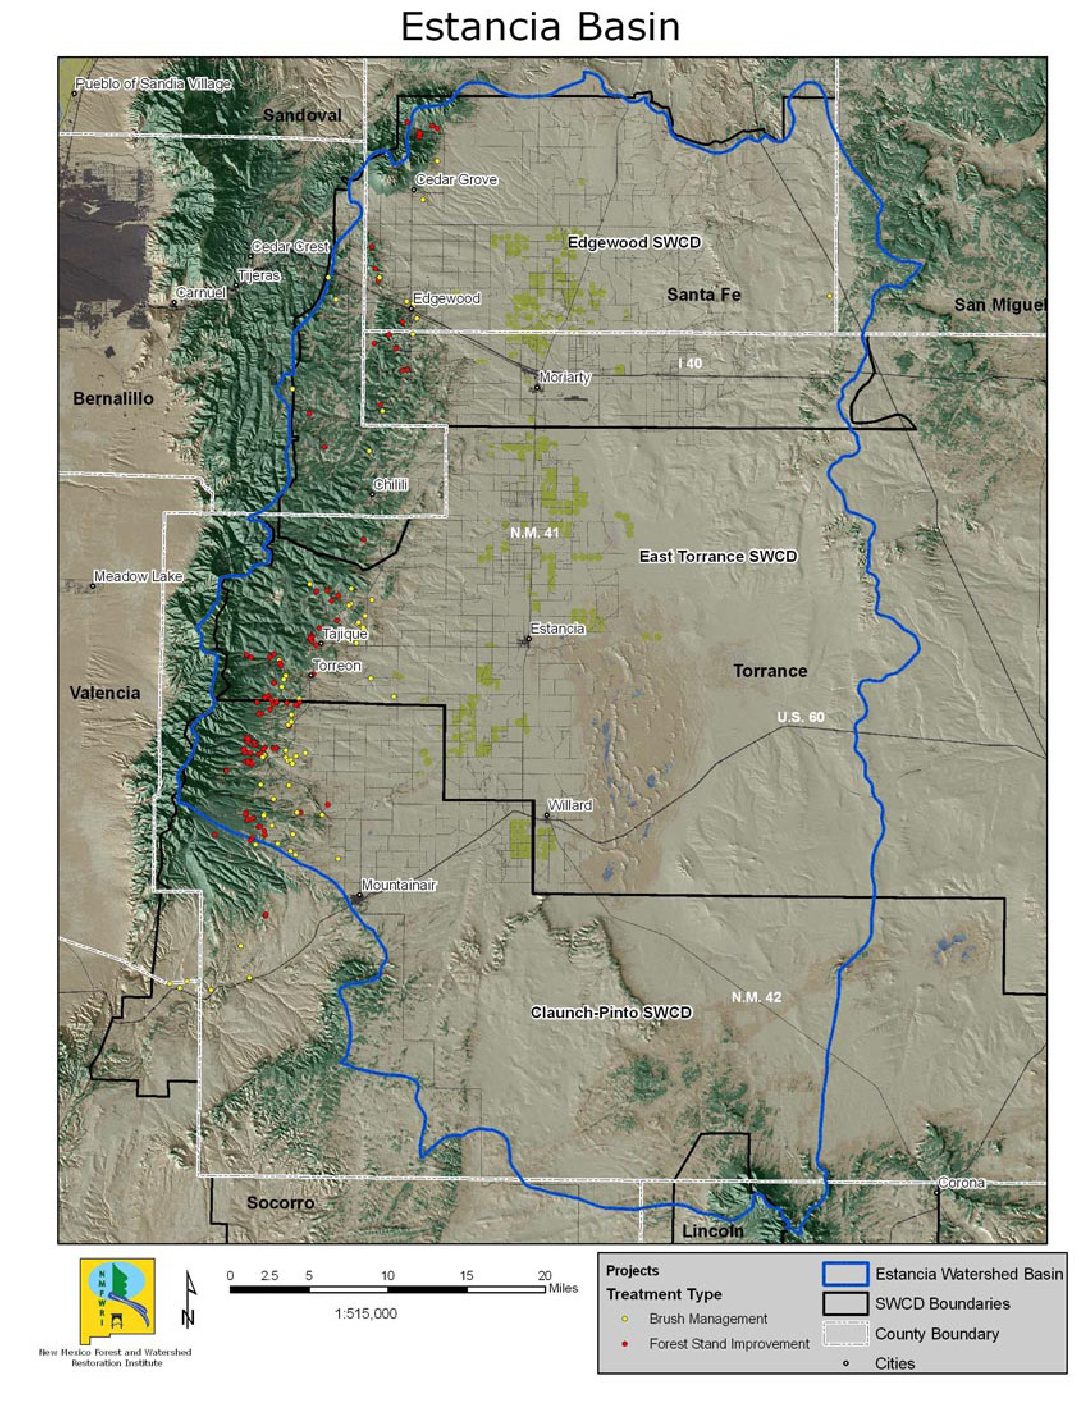 Estancia Basin Thinning Projects Map